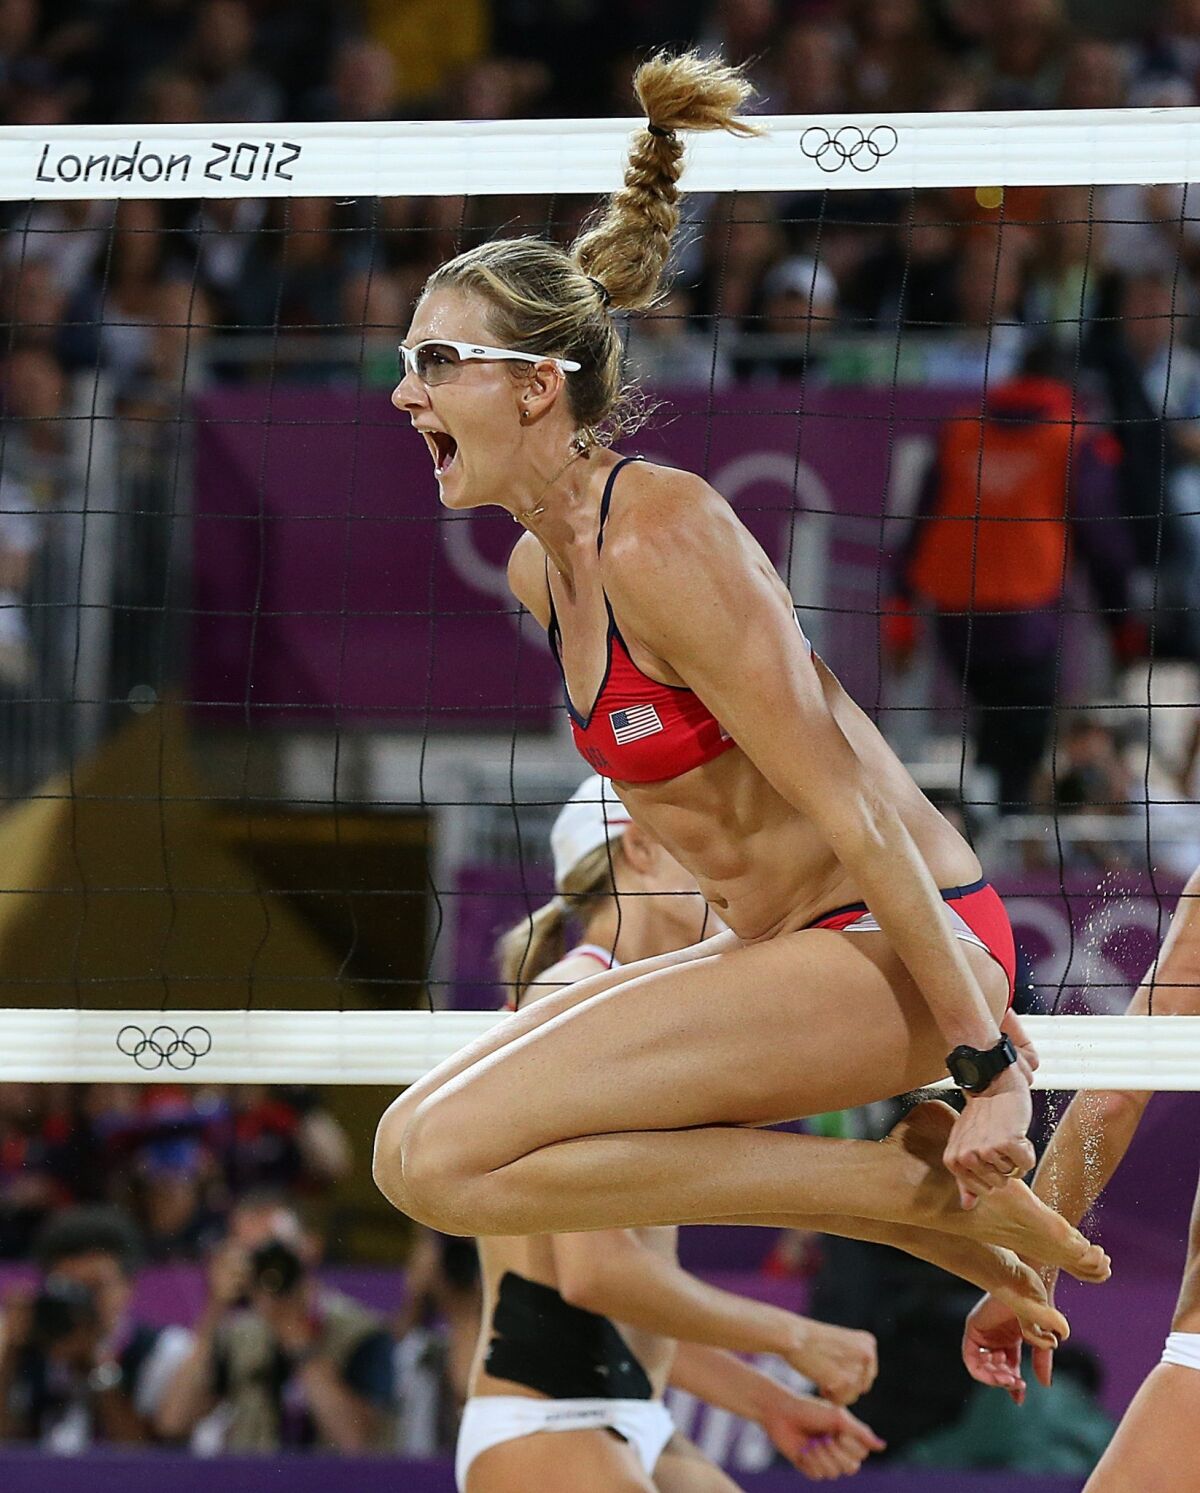 Kerri Walsh Jennings celebrates immediately after winning the women's beach volleyball gold-medal match at the 2012 London Olympics. She's aiming to win a fourth gold medal at the 2016 Rio de Janeiro Olympic Games.